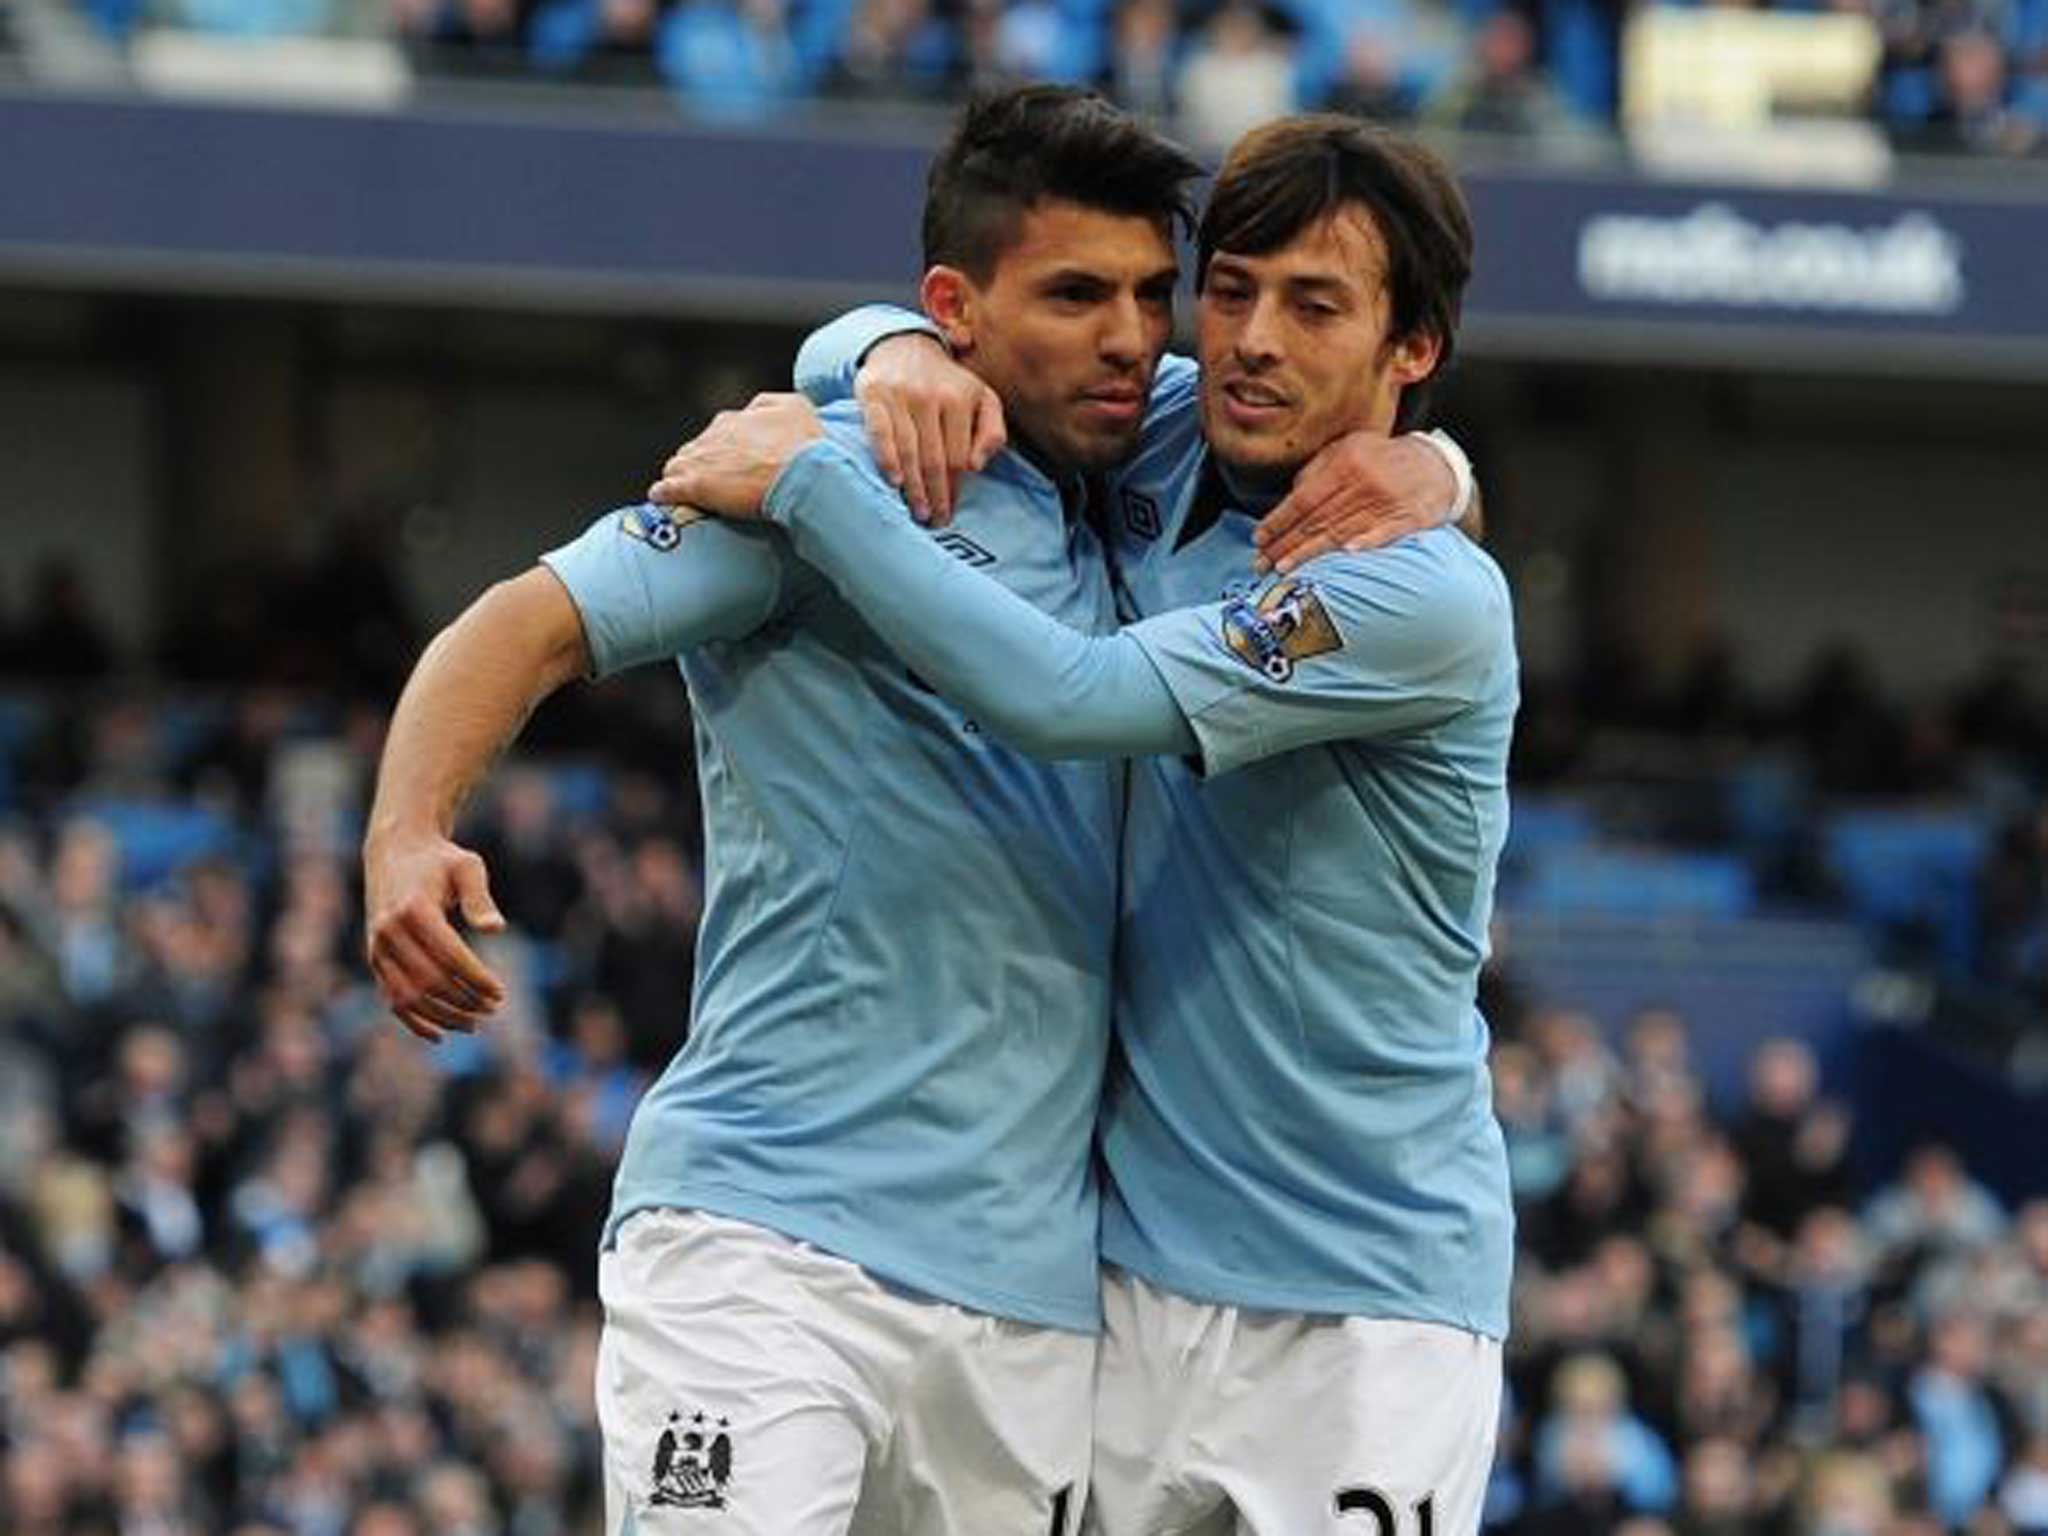 Tight bond: Aguero (left) and Silva have formed a sound understanding